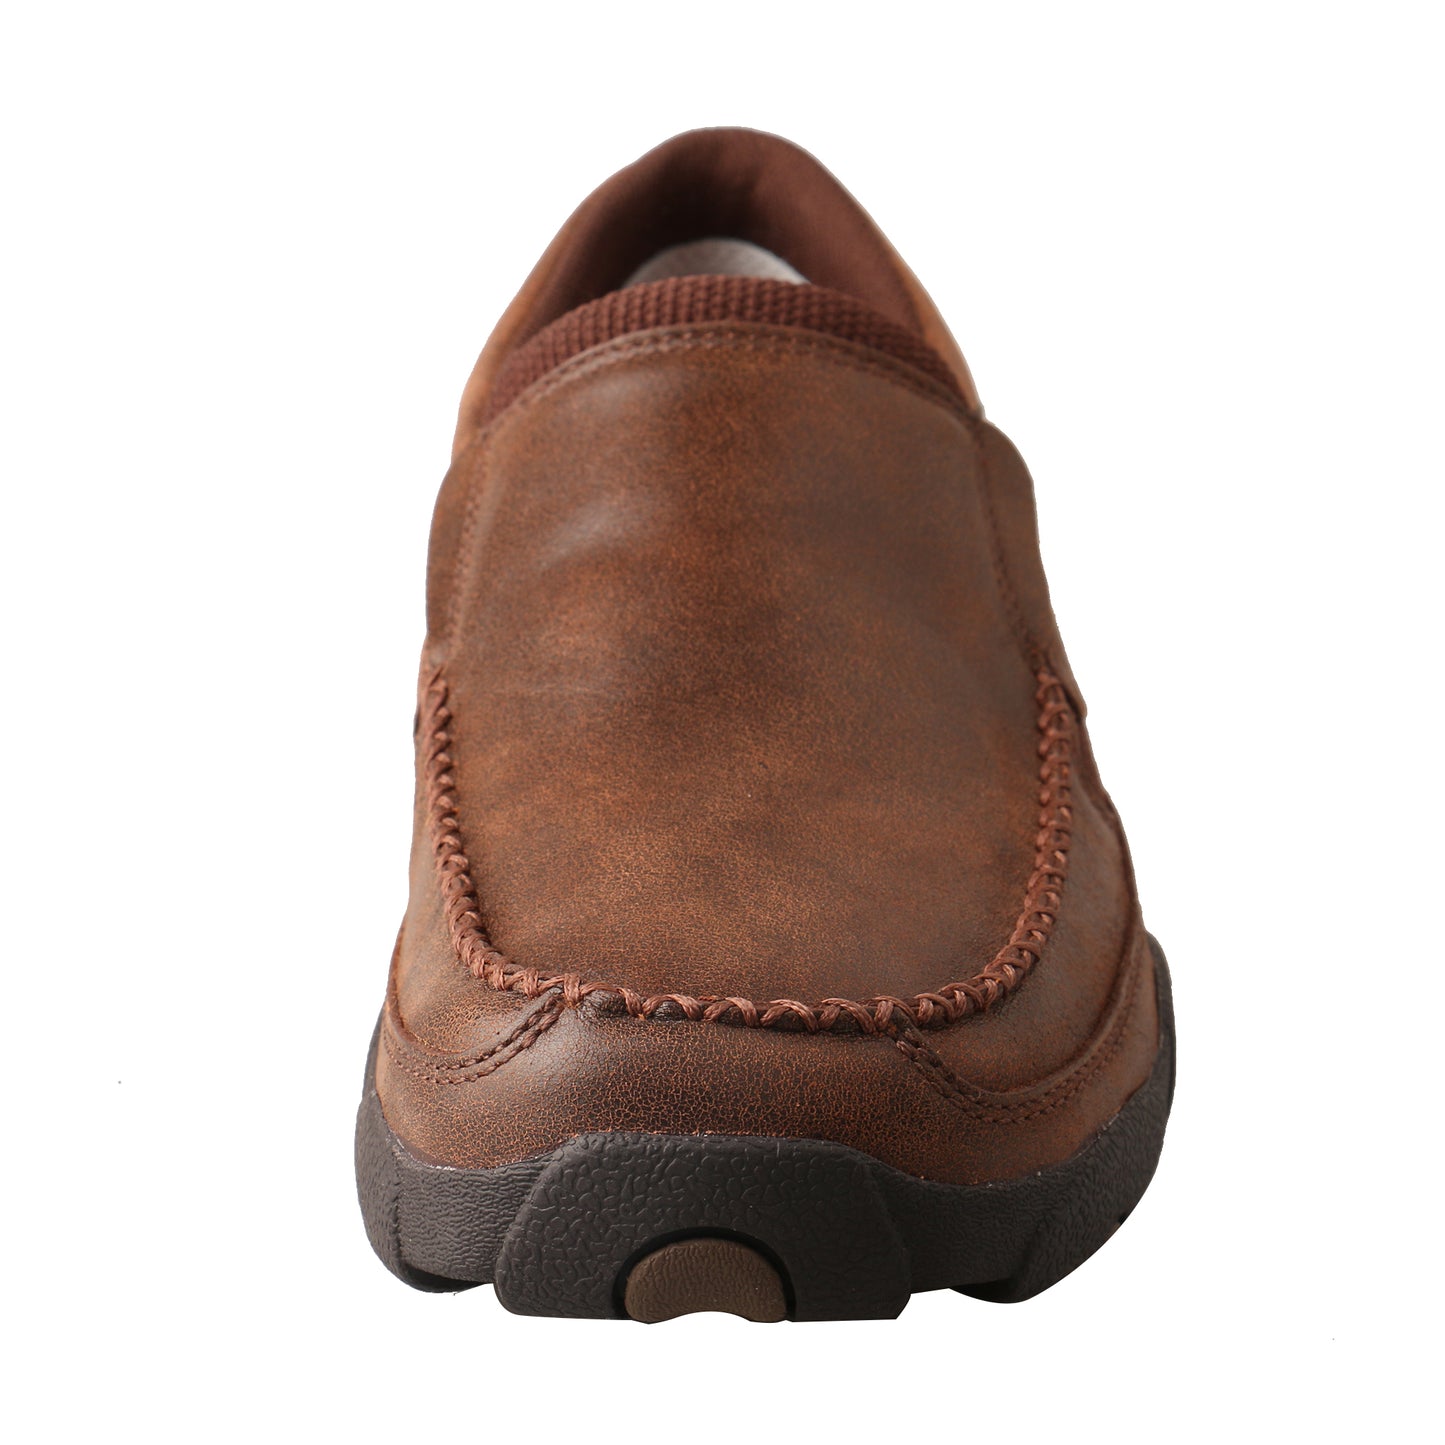 Picture of outside of Men's Twisted X Slip-On Driving Moc MDMS009